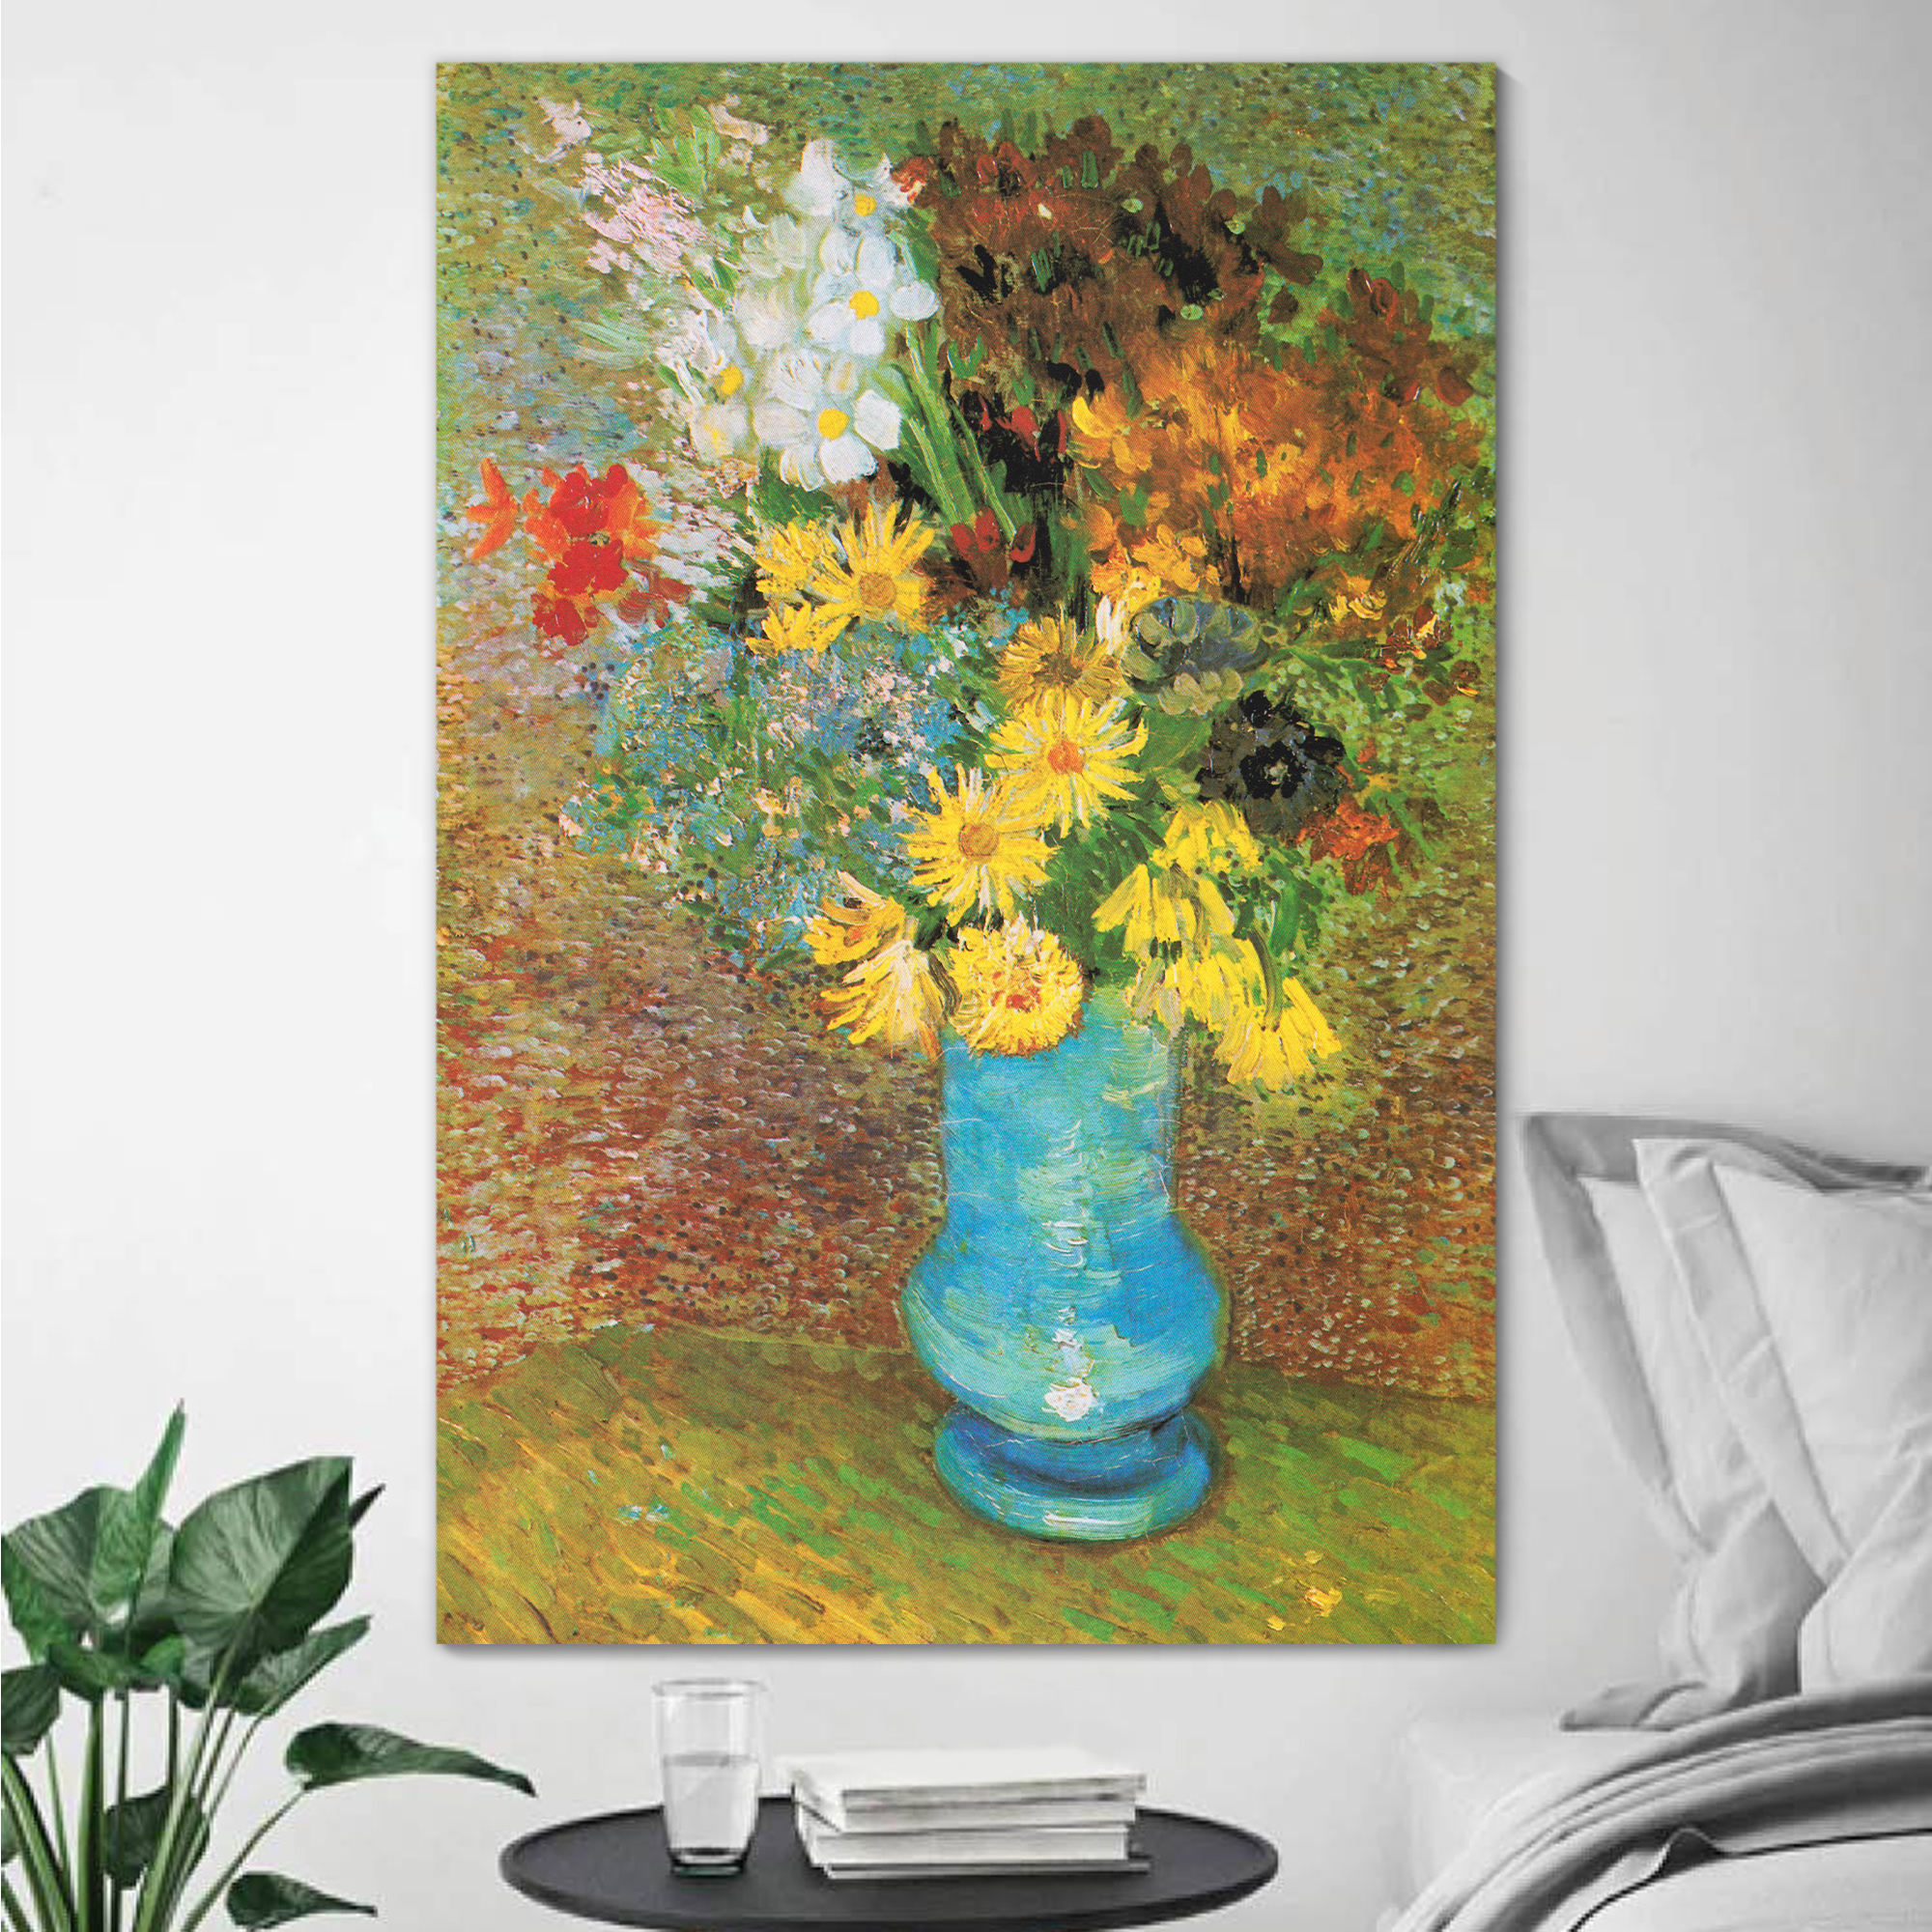 Flowers in a Blue Vase, 1887 by Vincent Van Gogh - Canvas Print Wall Art Famous Oil Painting Reproduction - 12